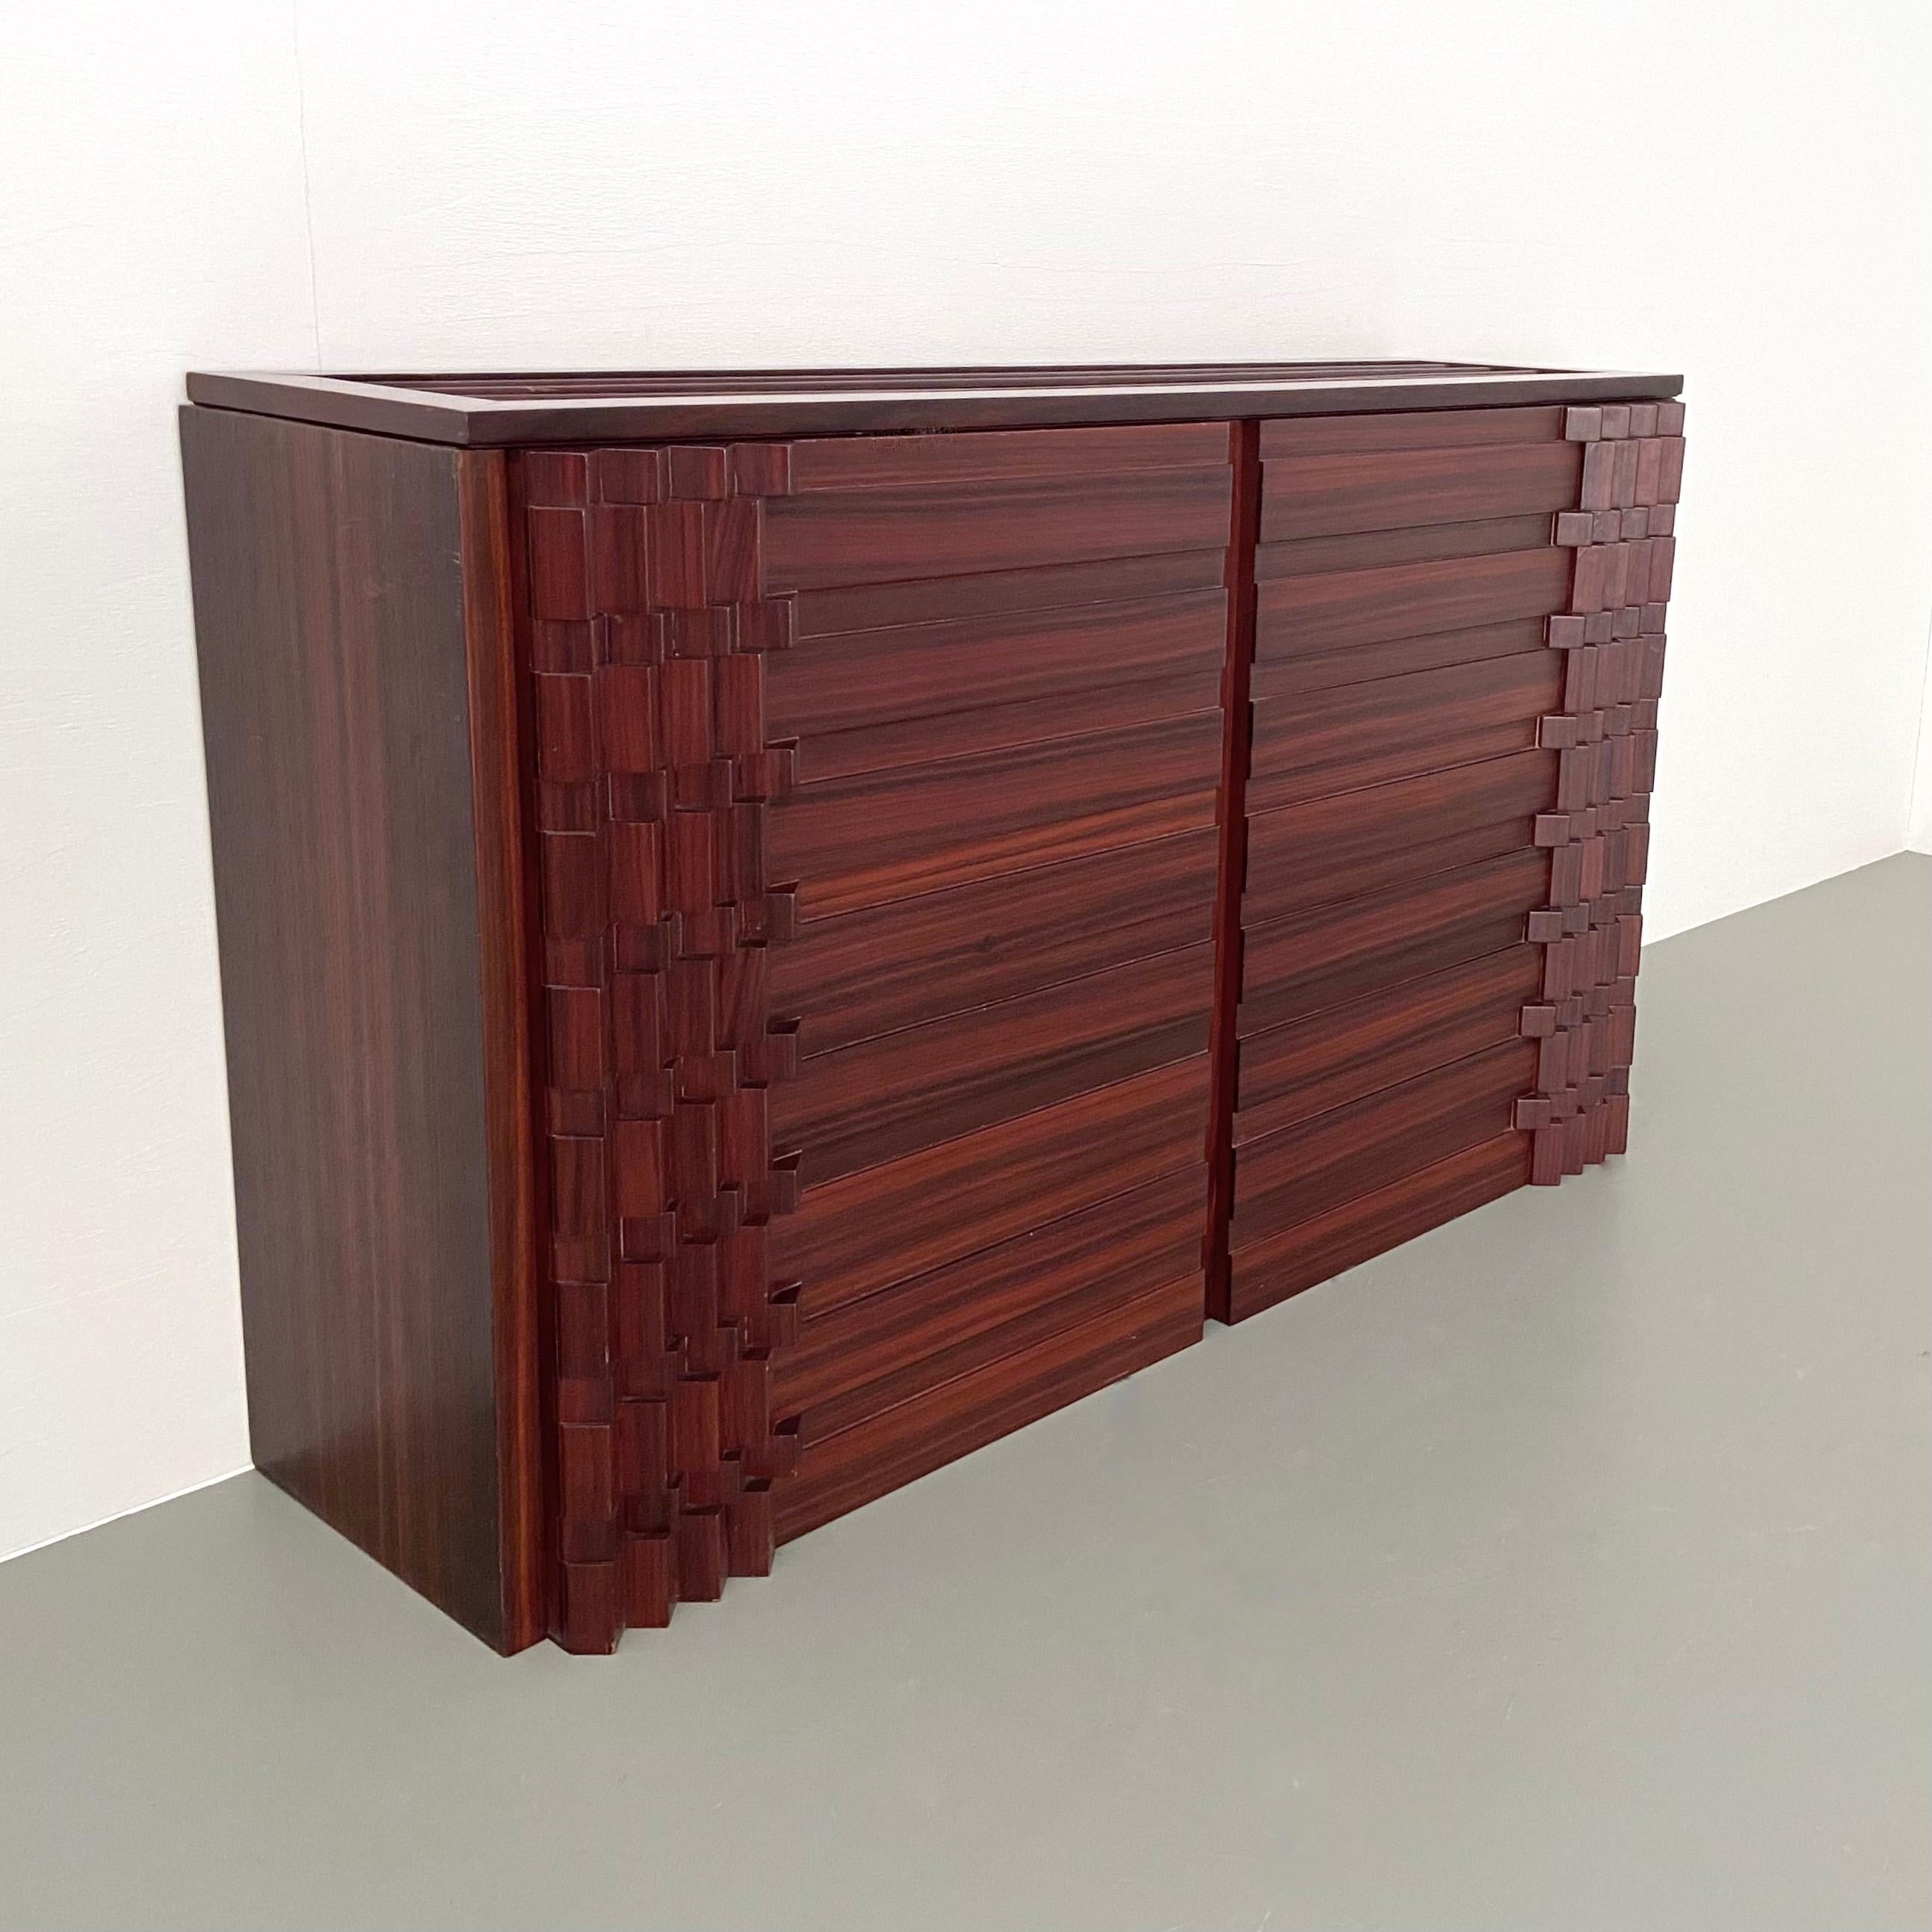 'Diamante' Cabinet by Luciano Frigerio, Italy, 1968 In Good Condition For Sale In Uithoorn, NL